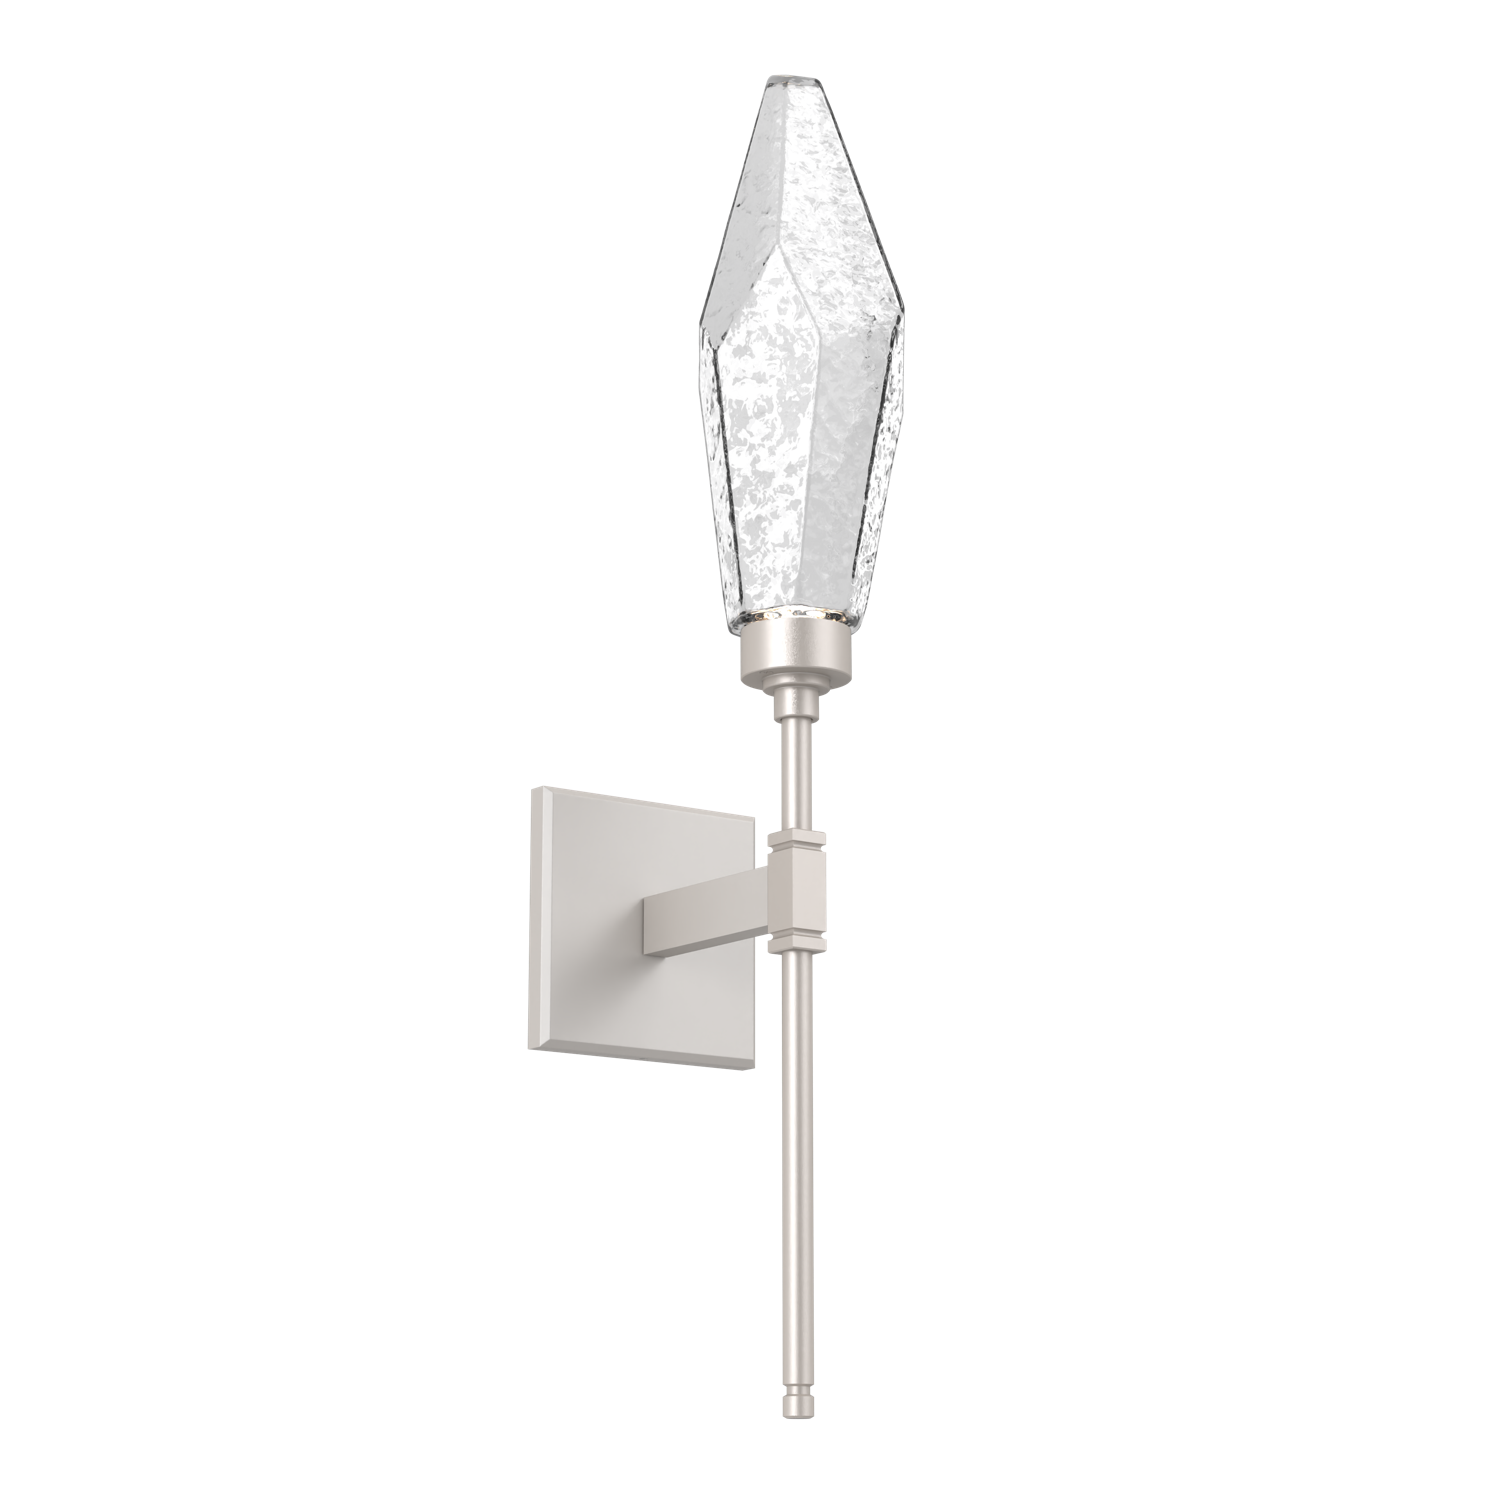 IDB0050-07-BS-CC-Hammerton-Studio-Rock-Crystal-belvedere-wall-sconce-with-beige-silver-finish-and-clear-glass-shades-and-LED-lamping